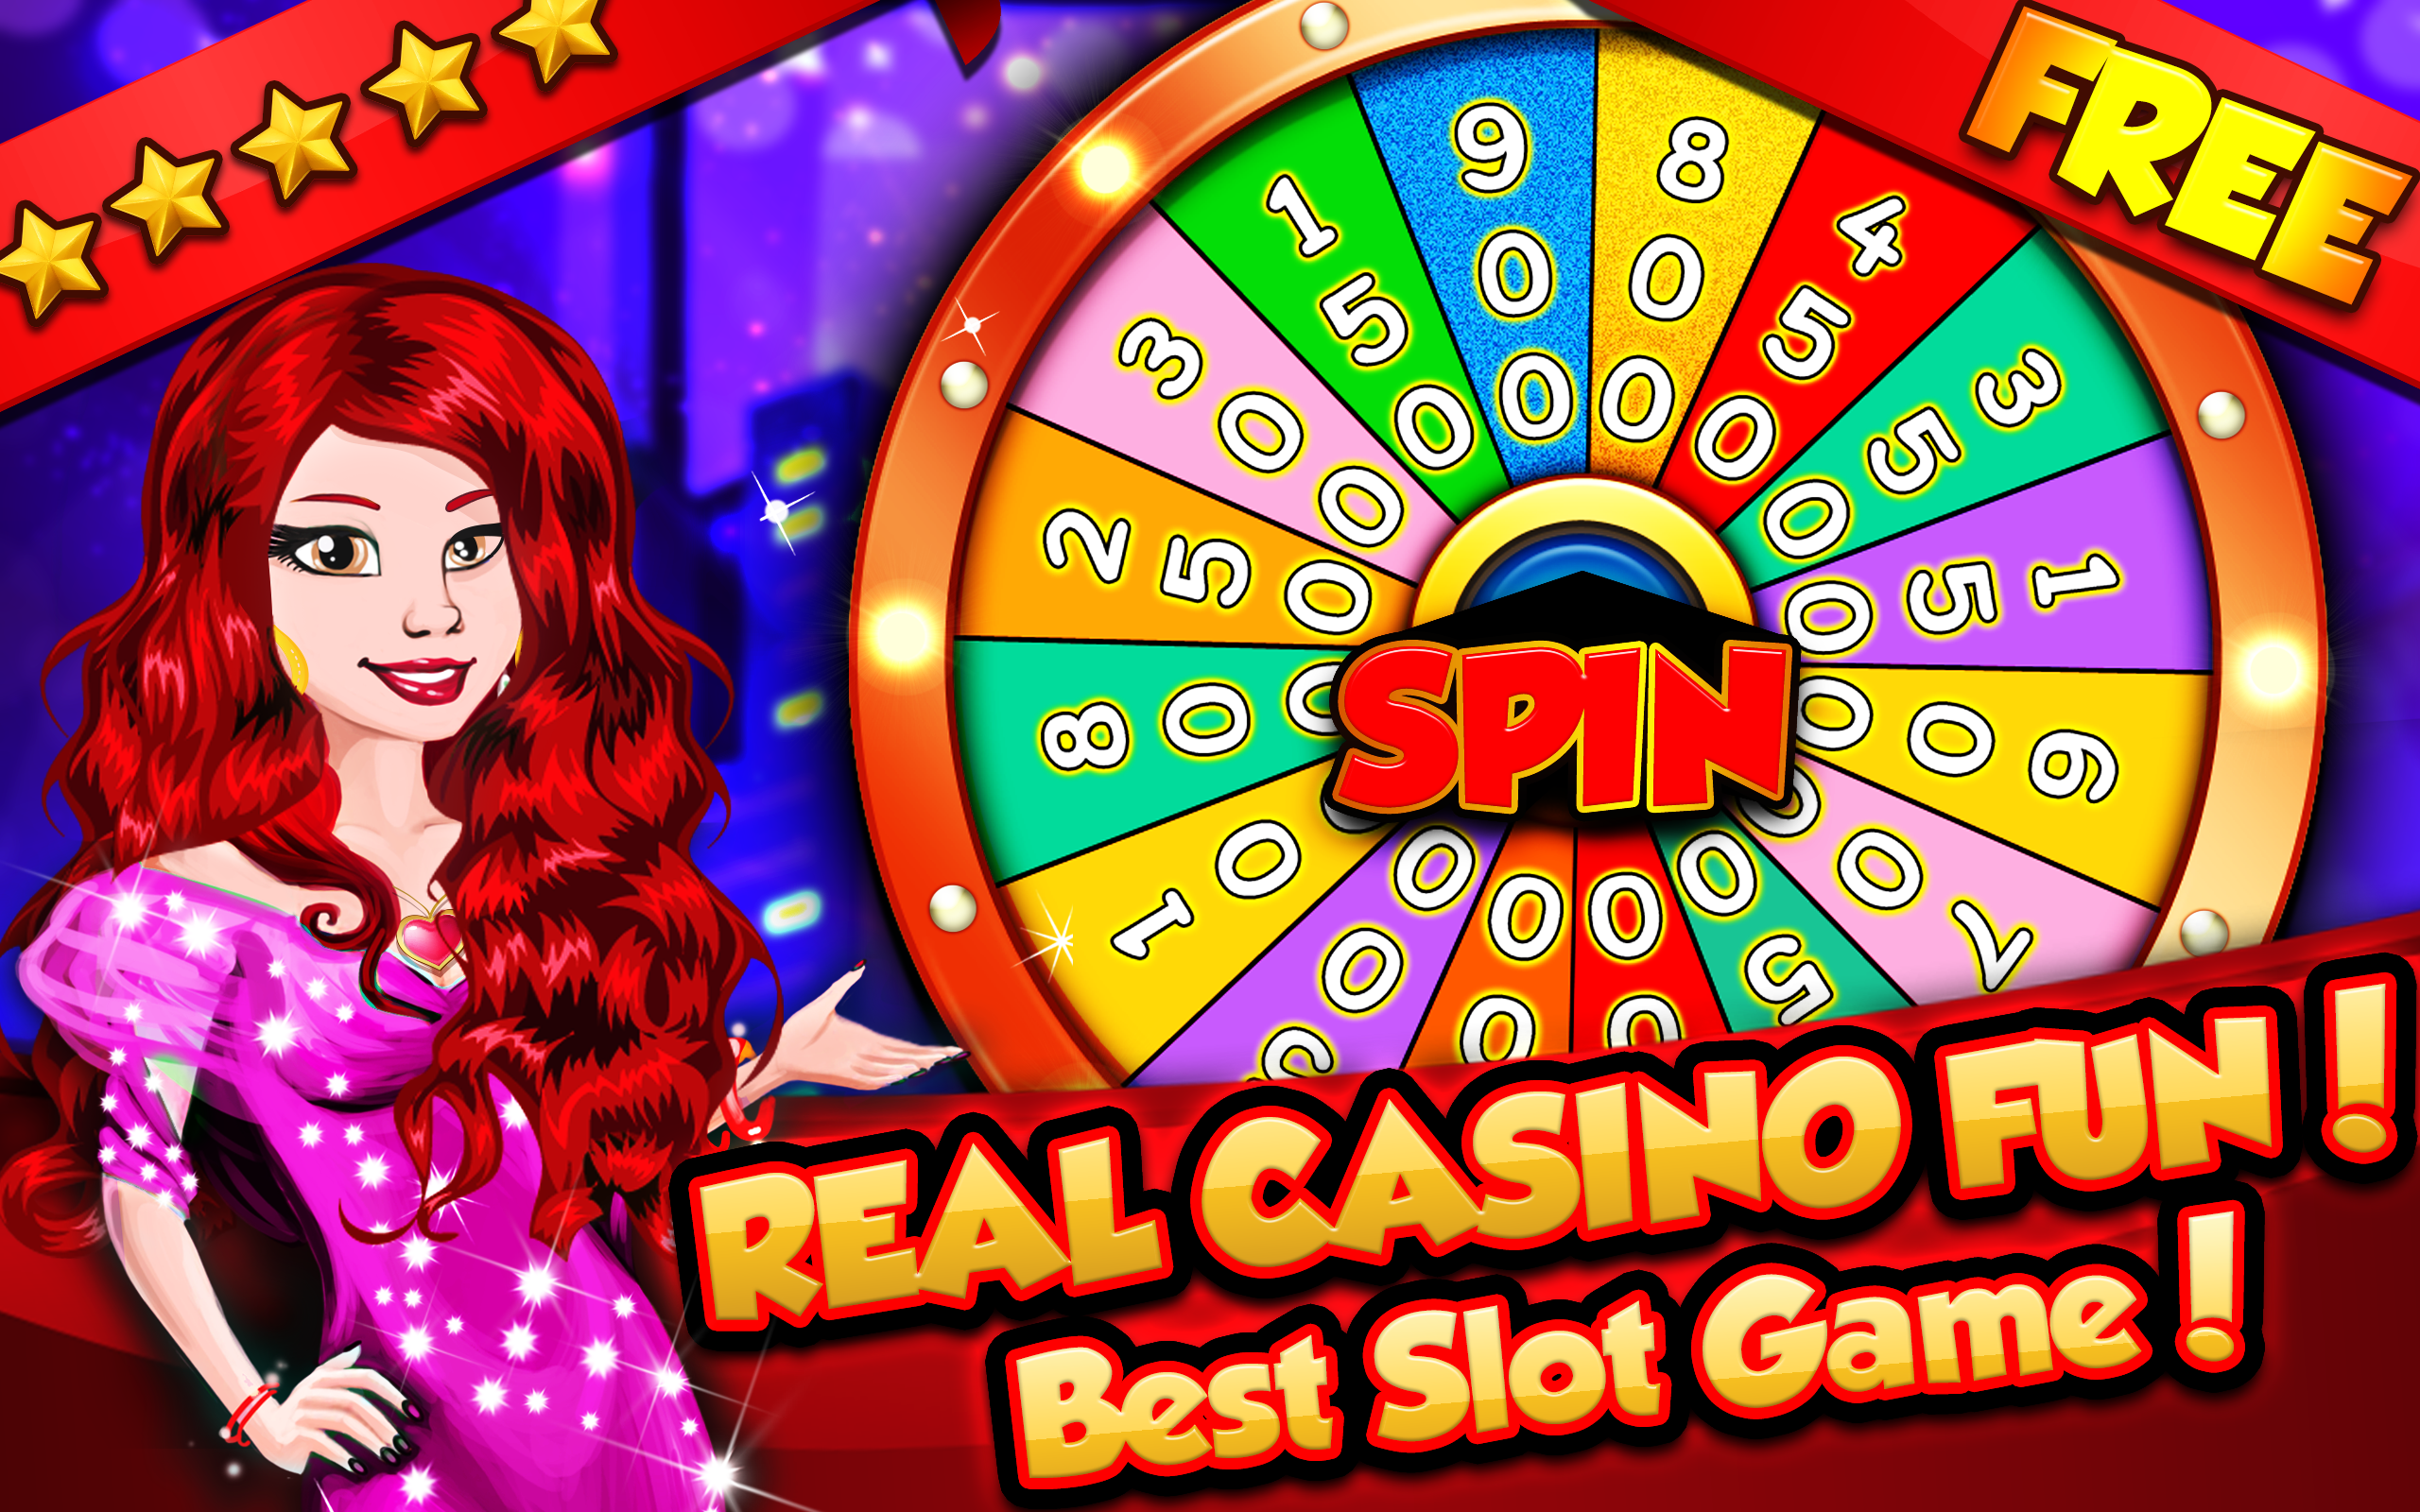 Best casino slots free coins codes